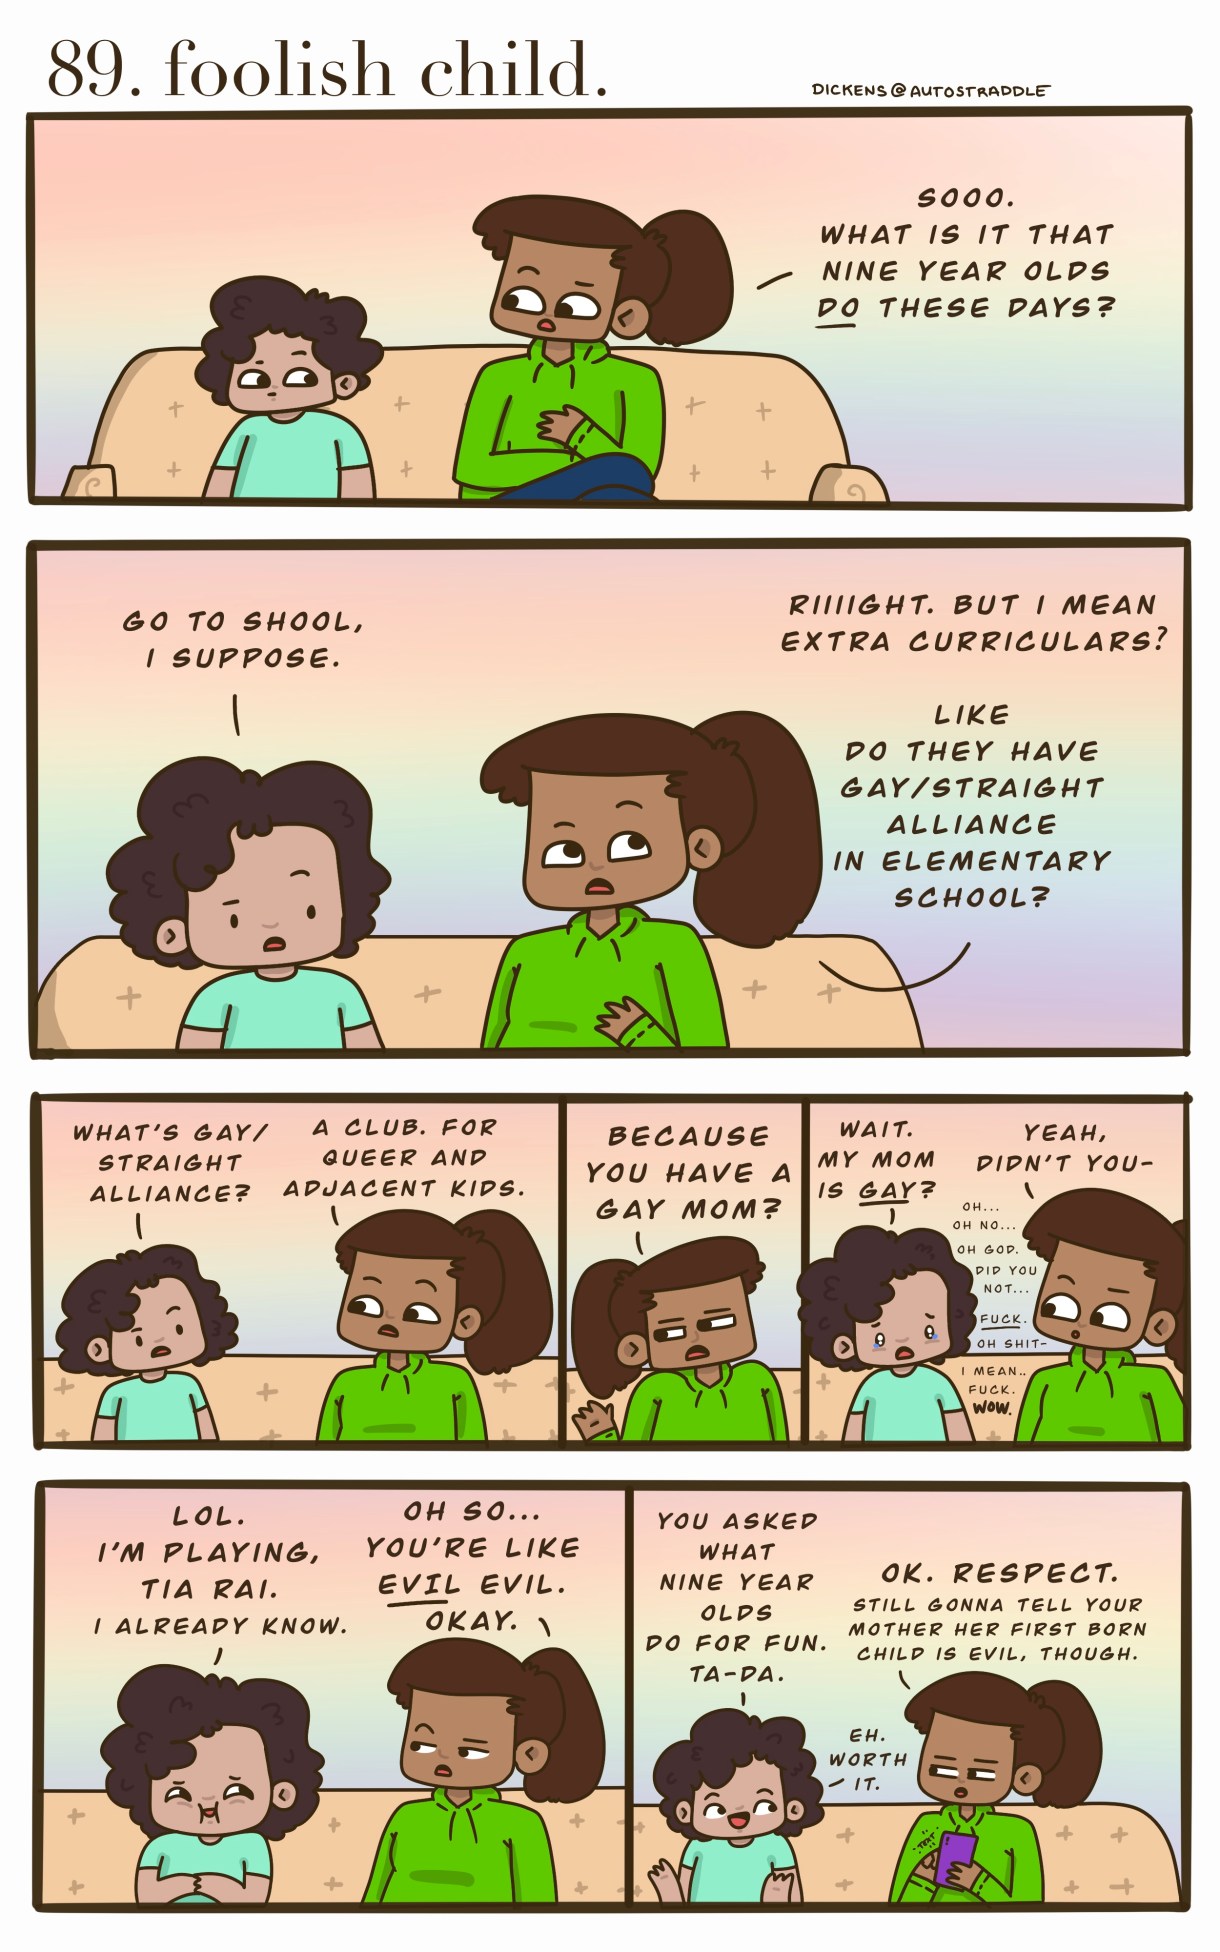 A small brown child sits on the couch with their aunt. The child is in a turquoise shirt and the aunt is in a green hoodie with a ponytail. She asks the child, "what do kids Do these days?" They joke for a while until the aunt asks if the child is a member of the Gay/Straight Alliance at school, since their mom is gay. The child proceeds to feign innocence that they didn't know their mom is gay, causing their aunt to get embarrassed on purpose. The kid then bursts out laughing, "You asked what nine-year-olds do for fun? TA-DA!" And the aunt grumbles that the child is evil.